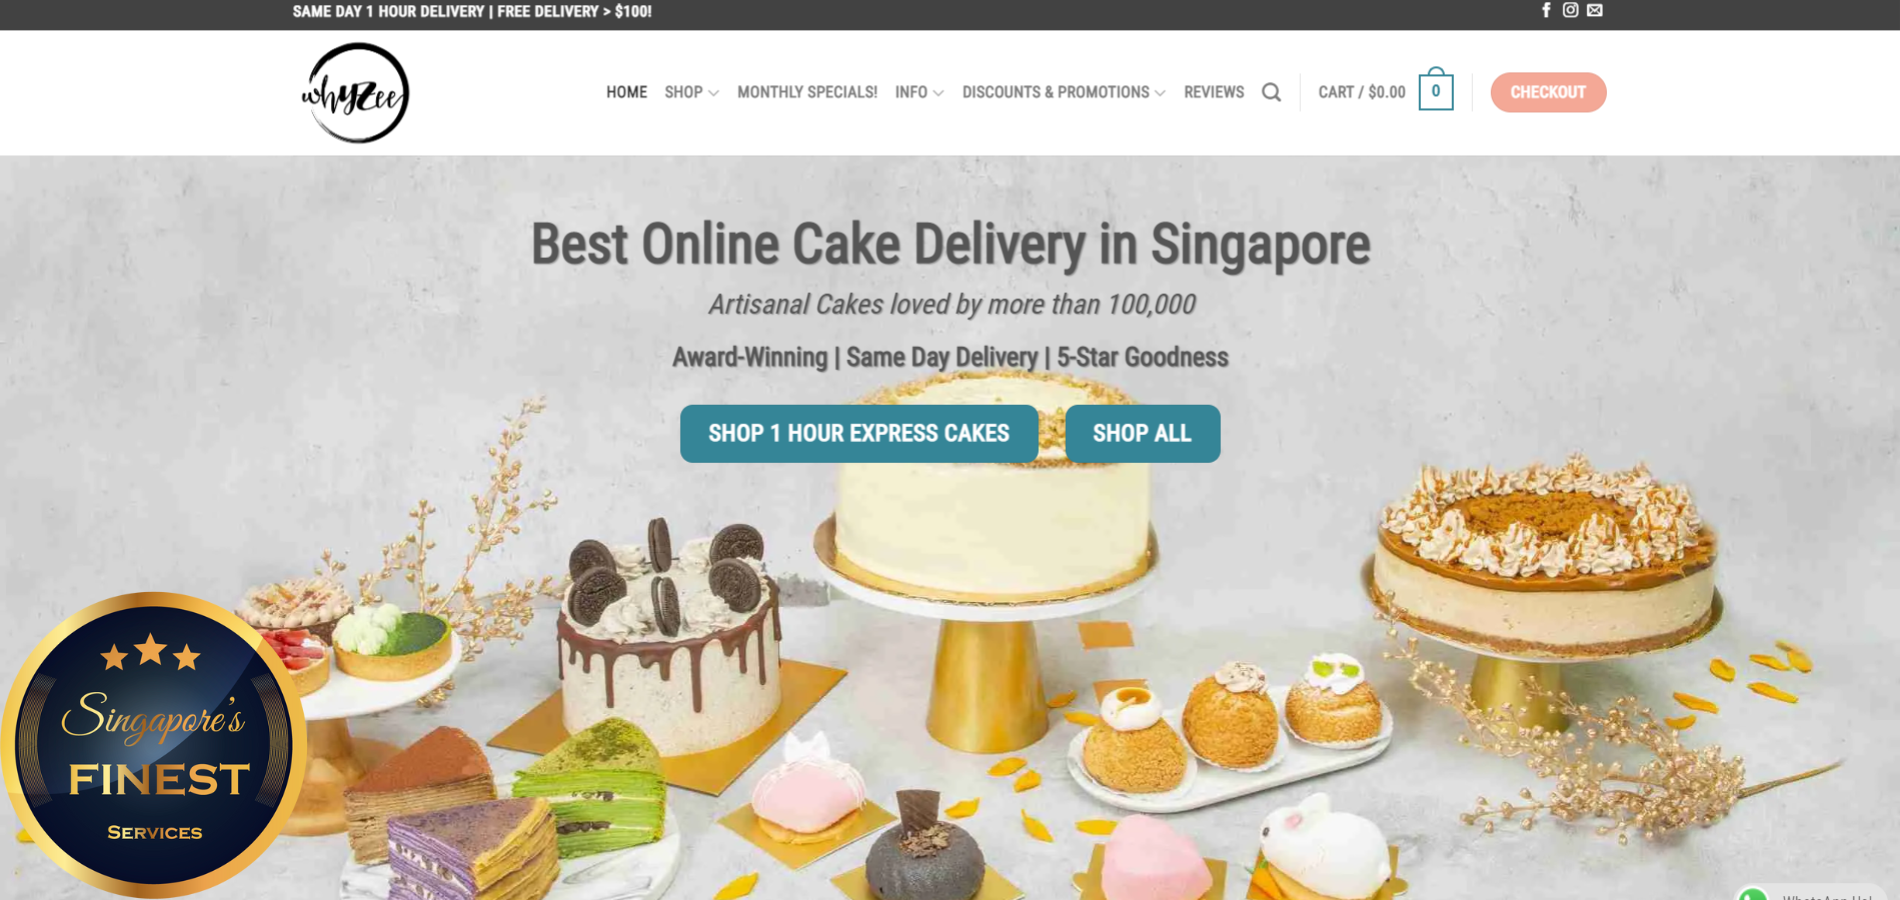 Best Korean Cake to Try in Singapore